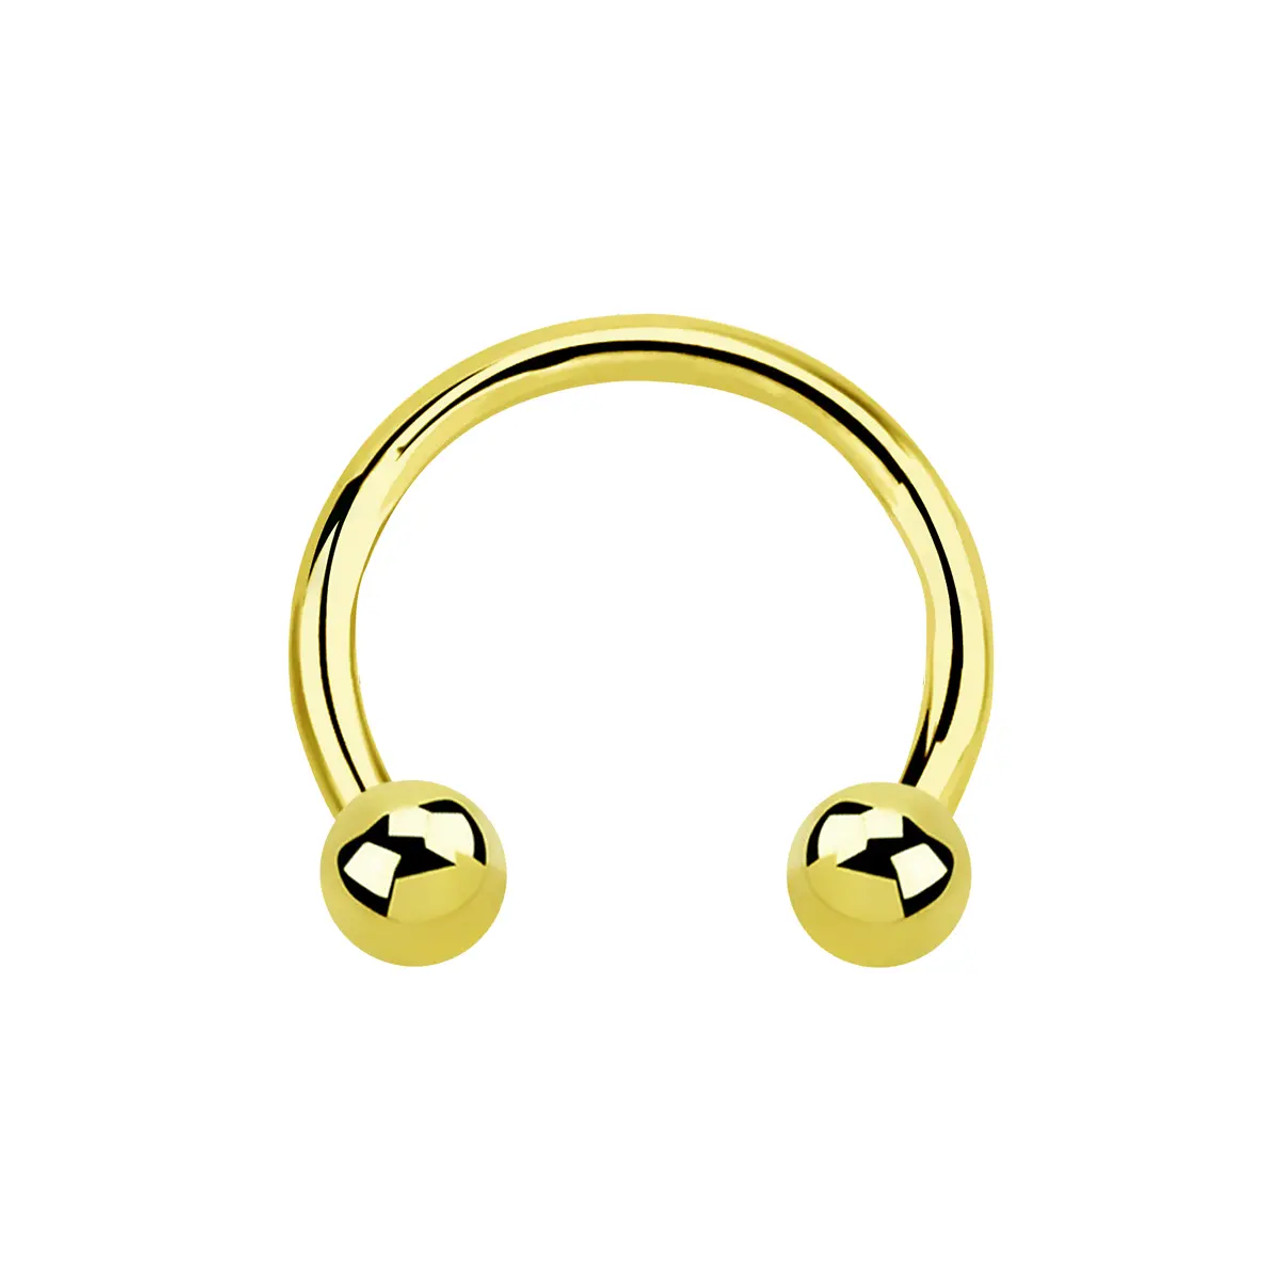 14G-16G 14K Solid Gold Circular Barbell Horseshoe Nose Hoops Ring Ball End Septum Piercing Jewelry 5/16